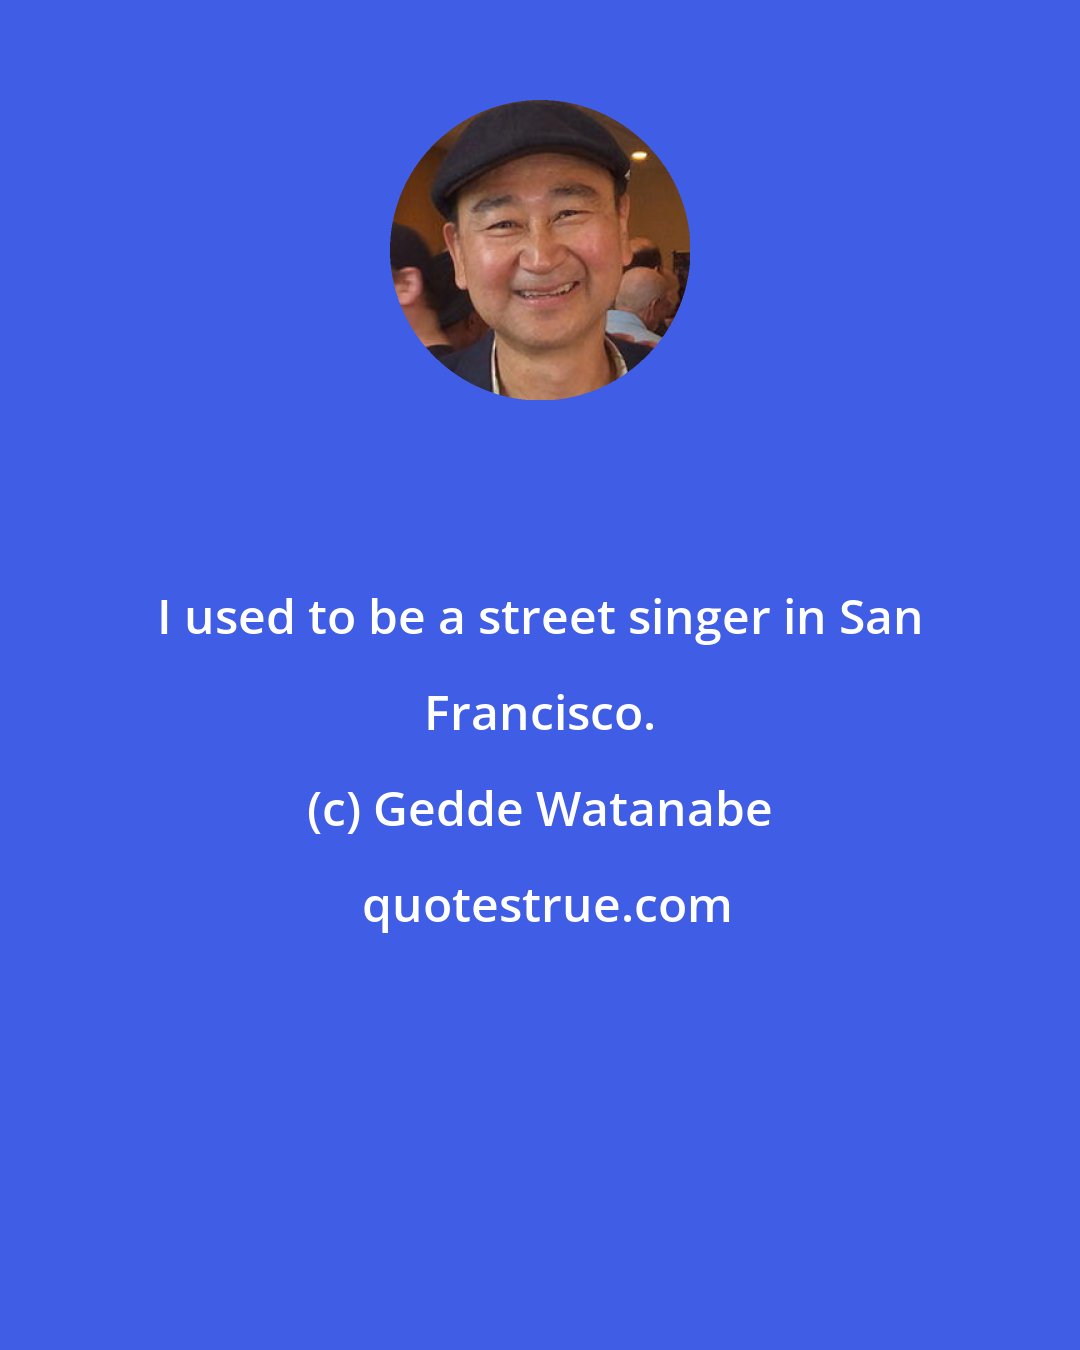 Gedde Watanabe: I used to be a street singer in San Francisco.